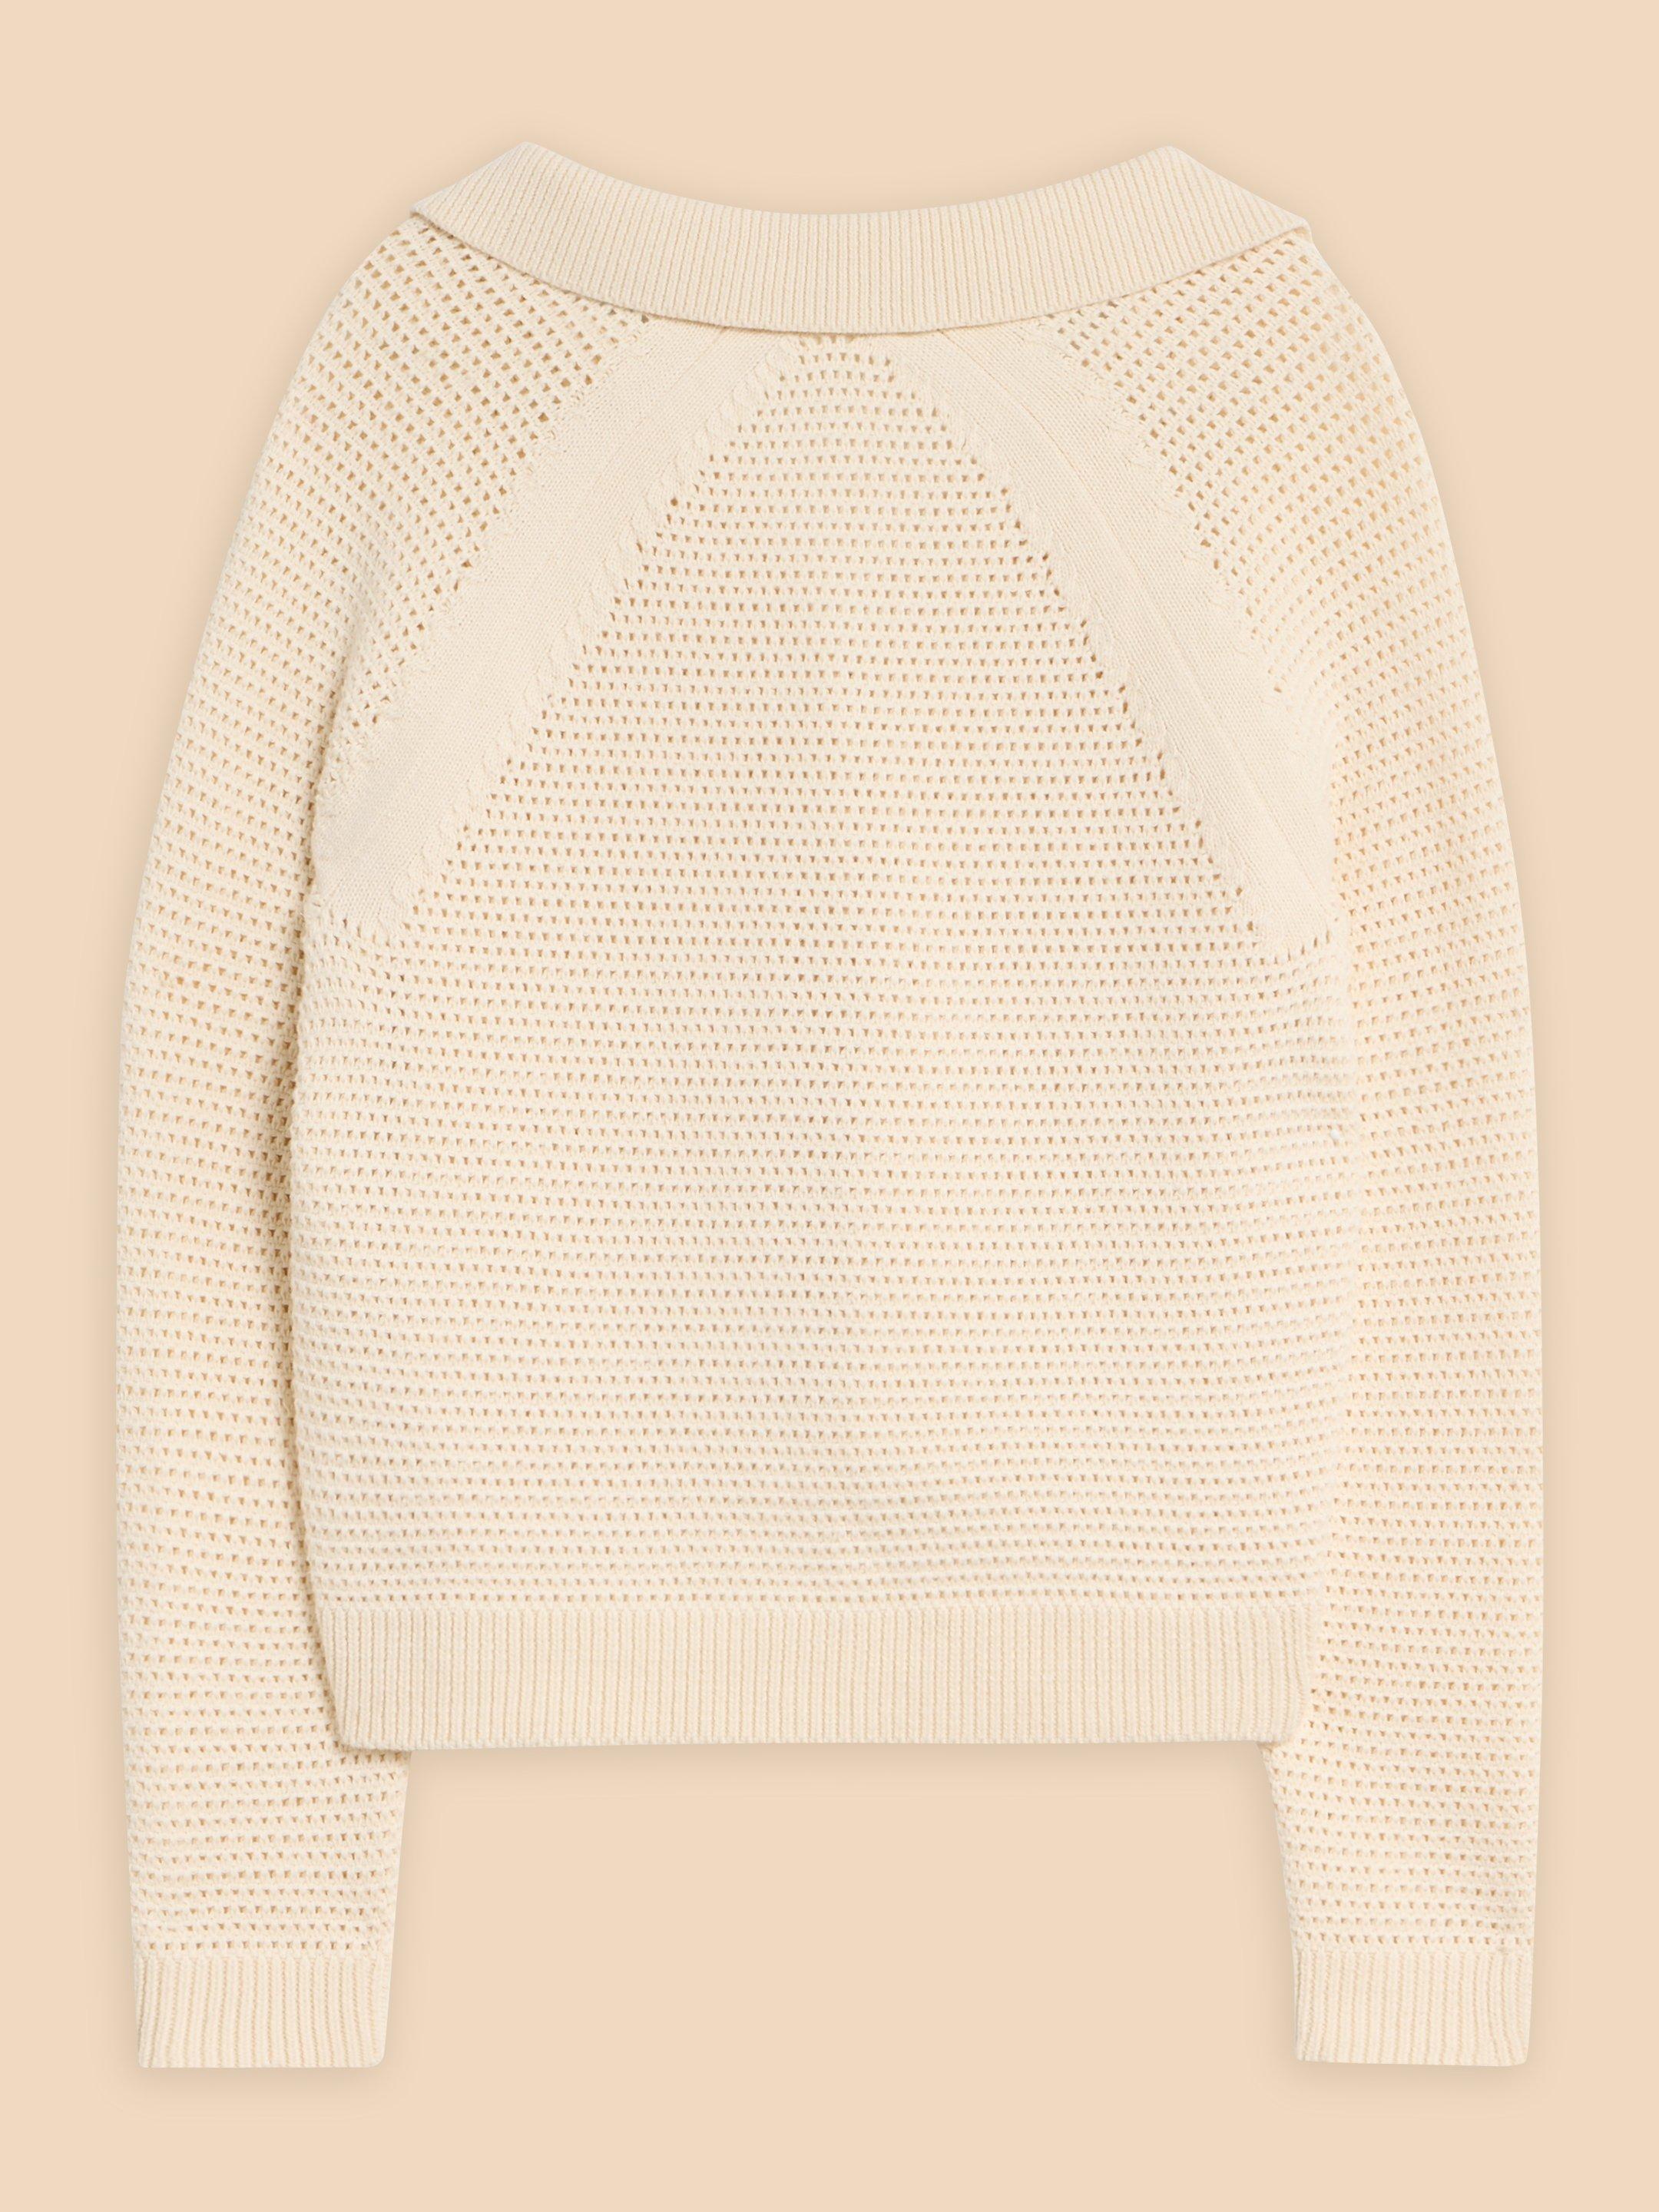 CHATERLY CROCHET COLLAR CARDI in NAT WHITE - FLAT BACK